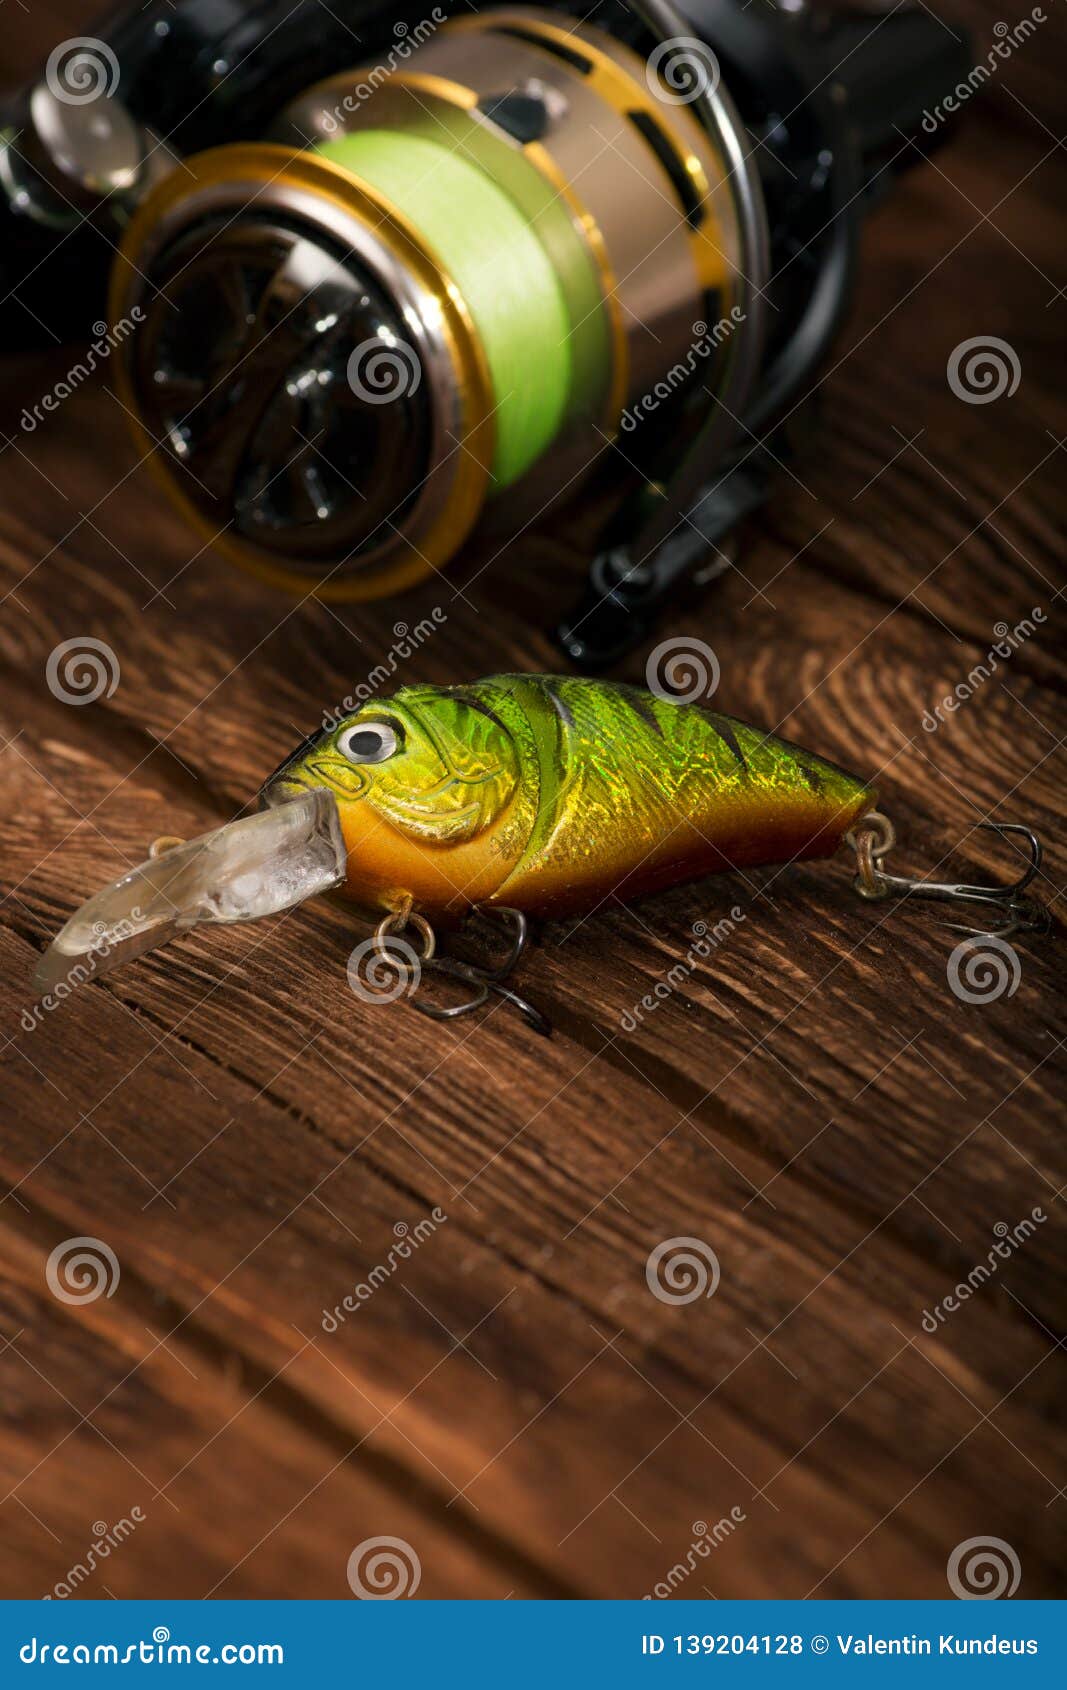 https://thumbs.dreamstime.com/z/spinning-reel-old-brown-wooden-background-fishing-lure-plastic-bright-green-wobbler-beautiful-relief-boards-spinning-139204128.jpg